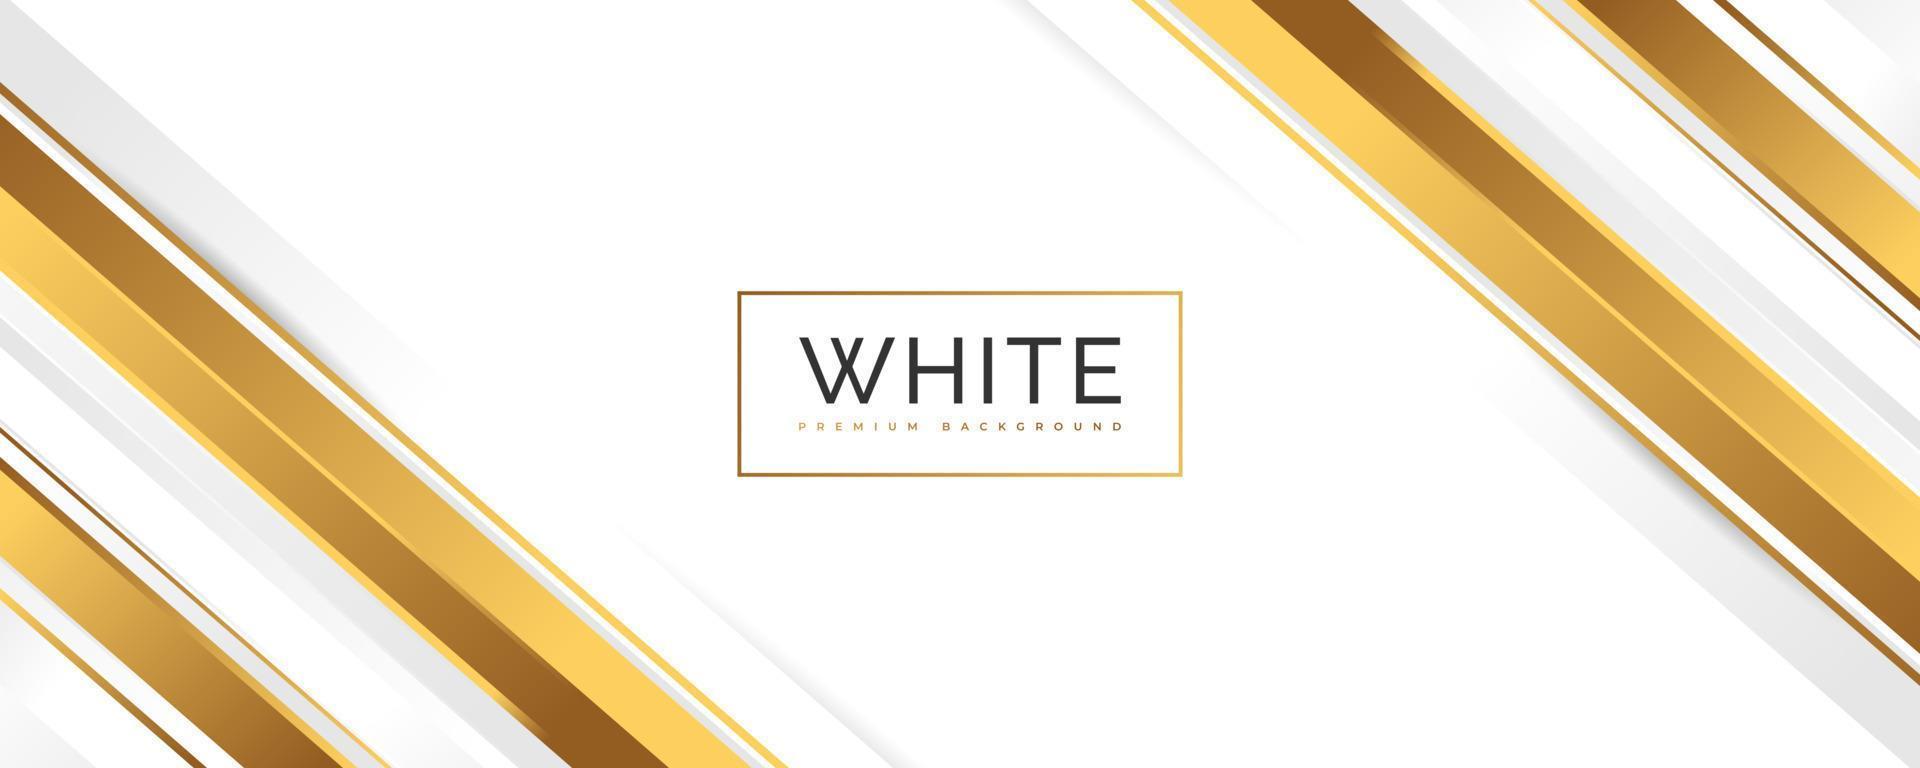 Luxury White and Gold Background Design in Paper Cut Style. Premium White Background with Golden Lines for Award, Nomination, Ceremony, Formal Invitation or Certificate Design vector